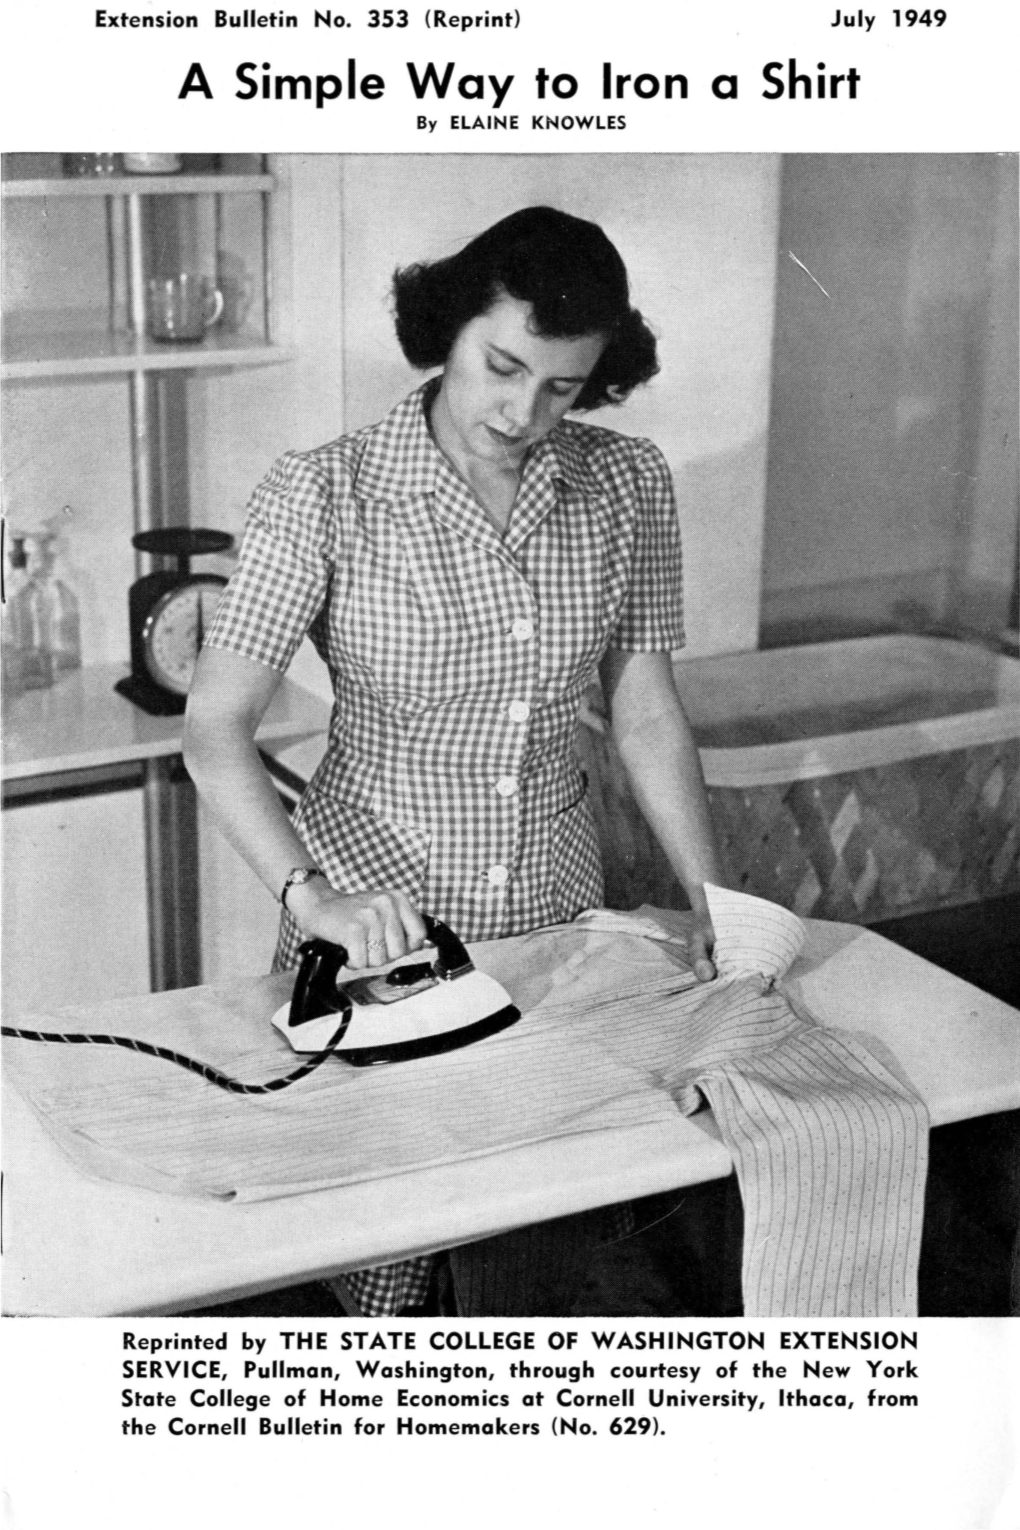 A Simple Way to Iron a Shirt by ELAINE KNOWLES